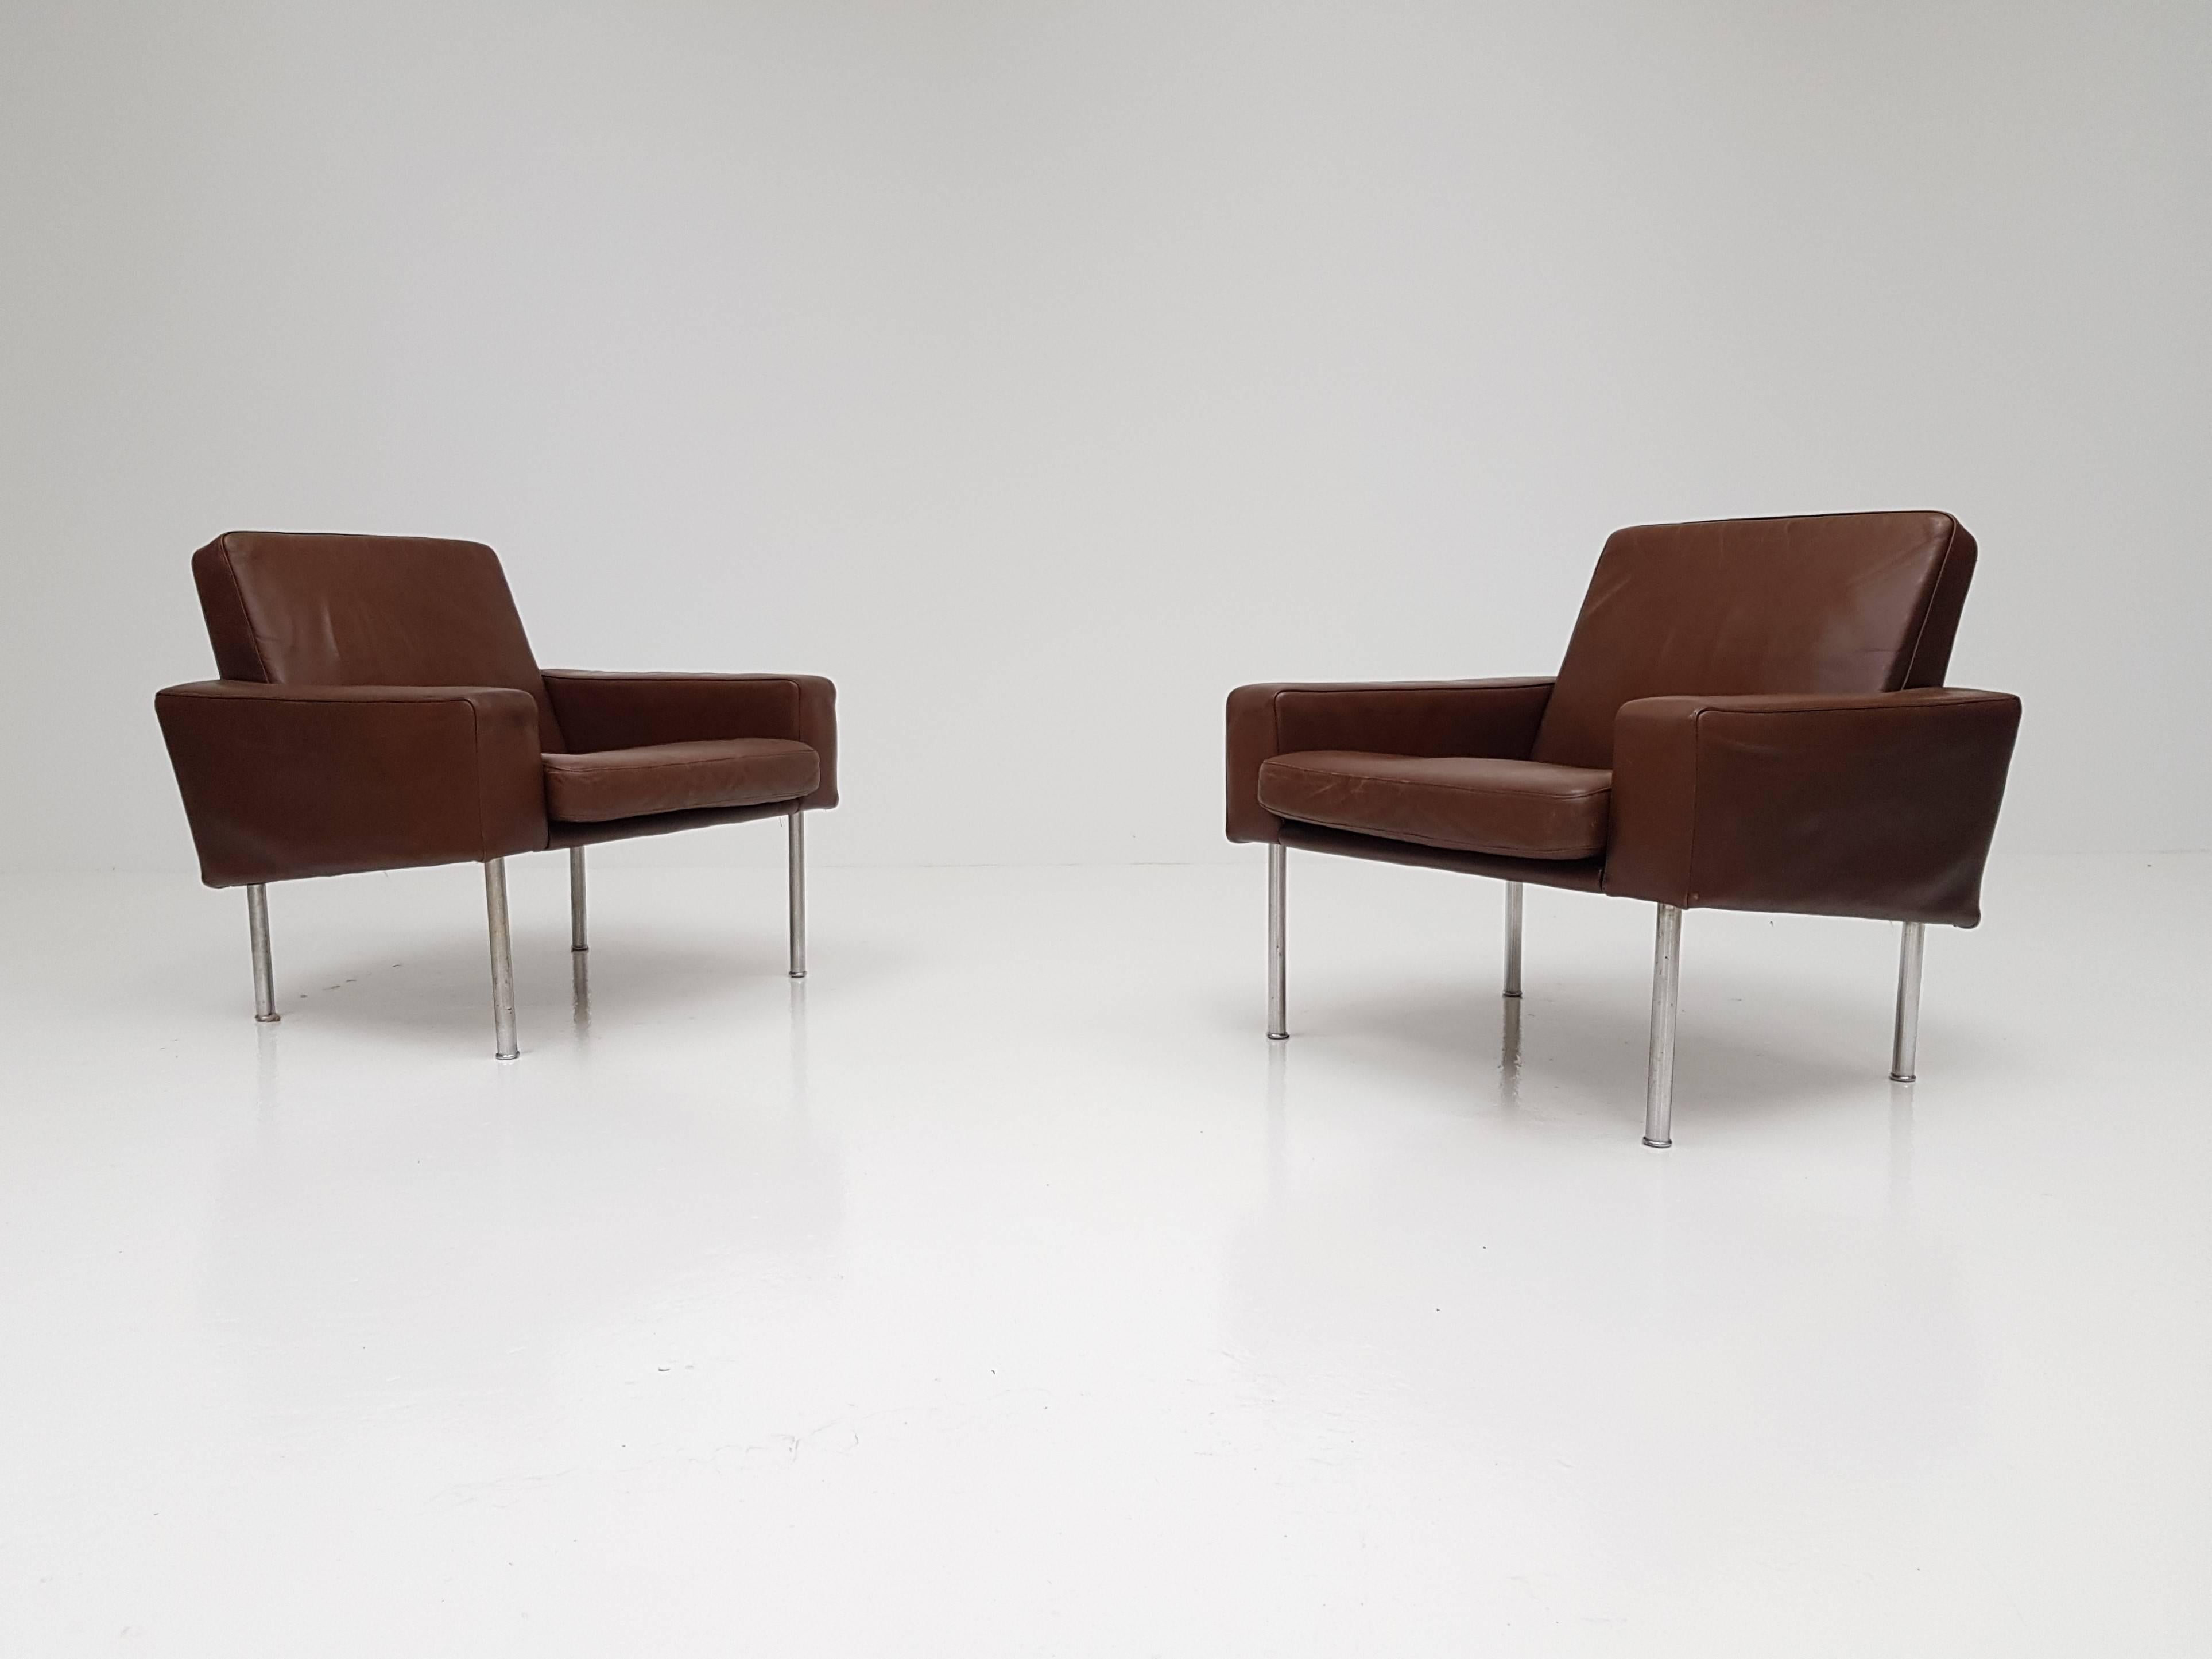 Stunning pair of Hans J. Wegner airport chairs model 34/1 on steel legs. These come with the original leather, hard to find chairs, great looking and comfortable.

Hans J. Wegner was certified as a joiner in 1931. After starting his career as a